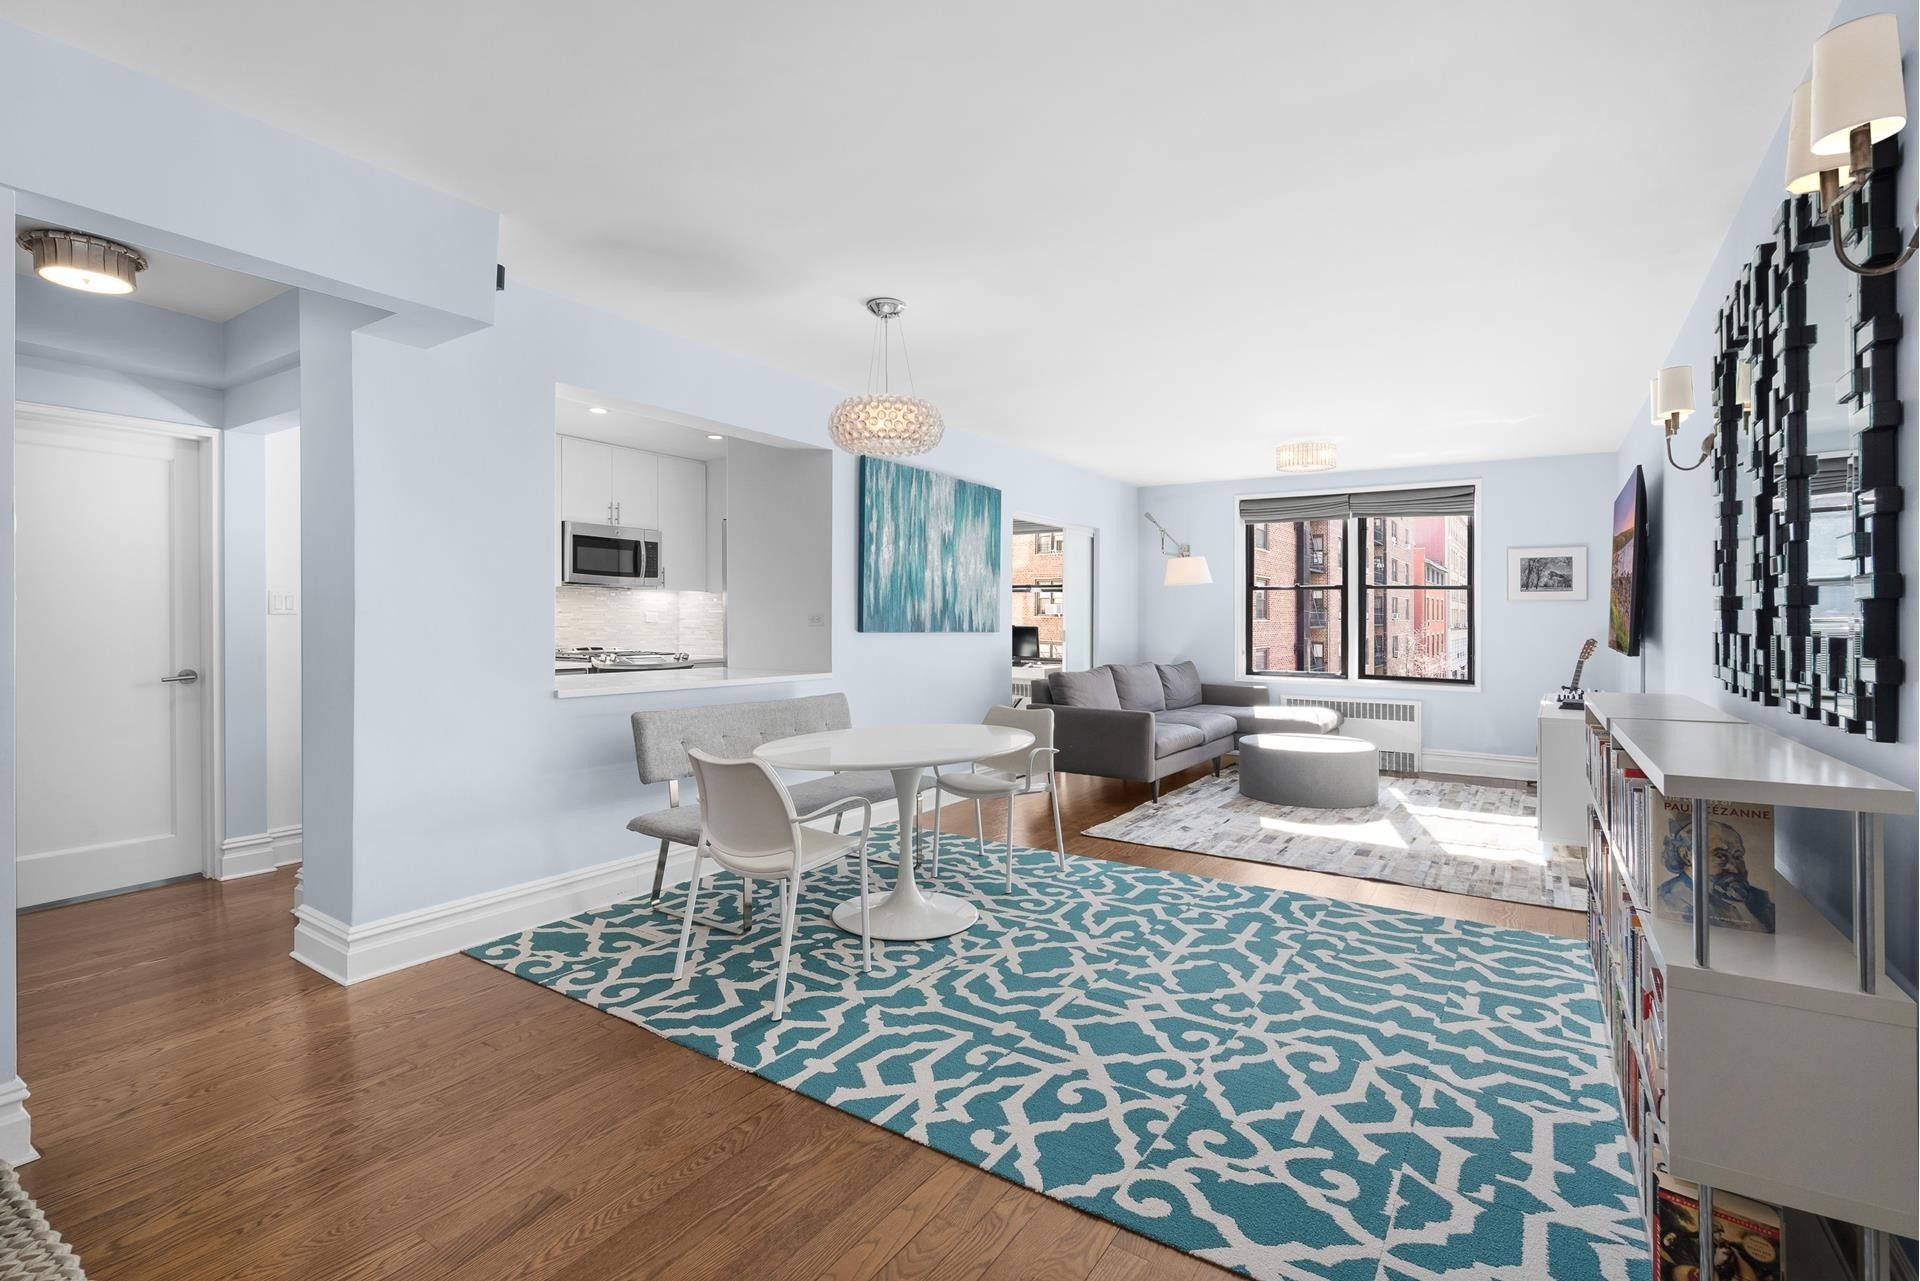 Co-op Properties for Sale at Lafayette, The, 30 E 9TH ST, 4LL Greenwich Village, New York, New York 10003